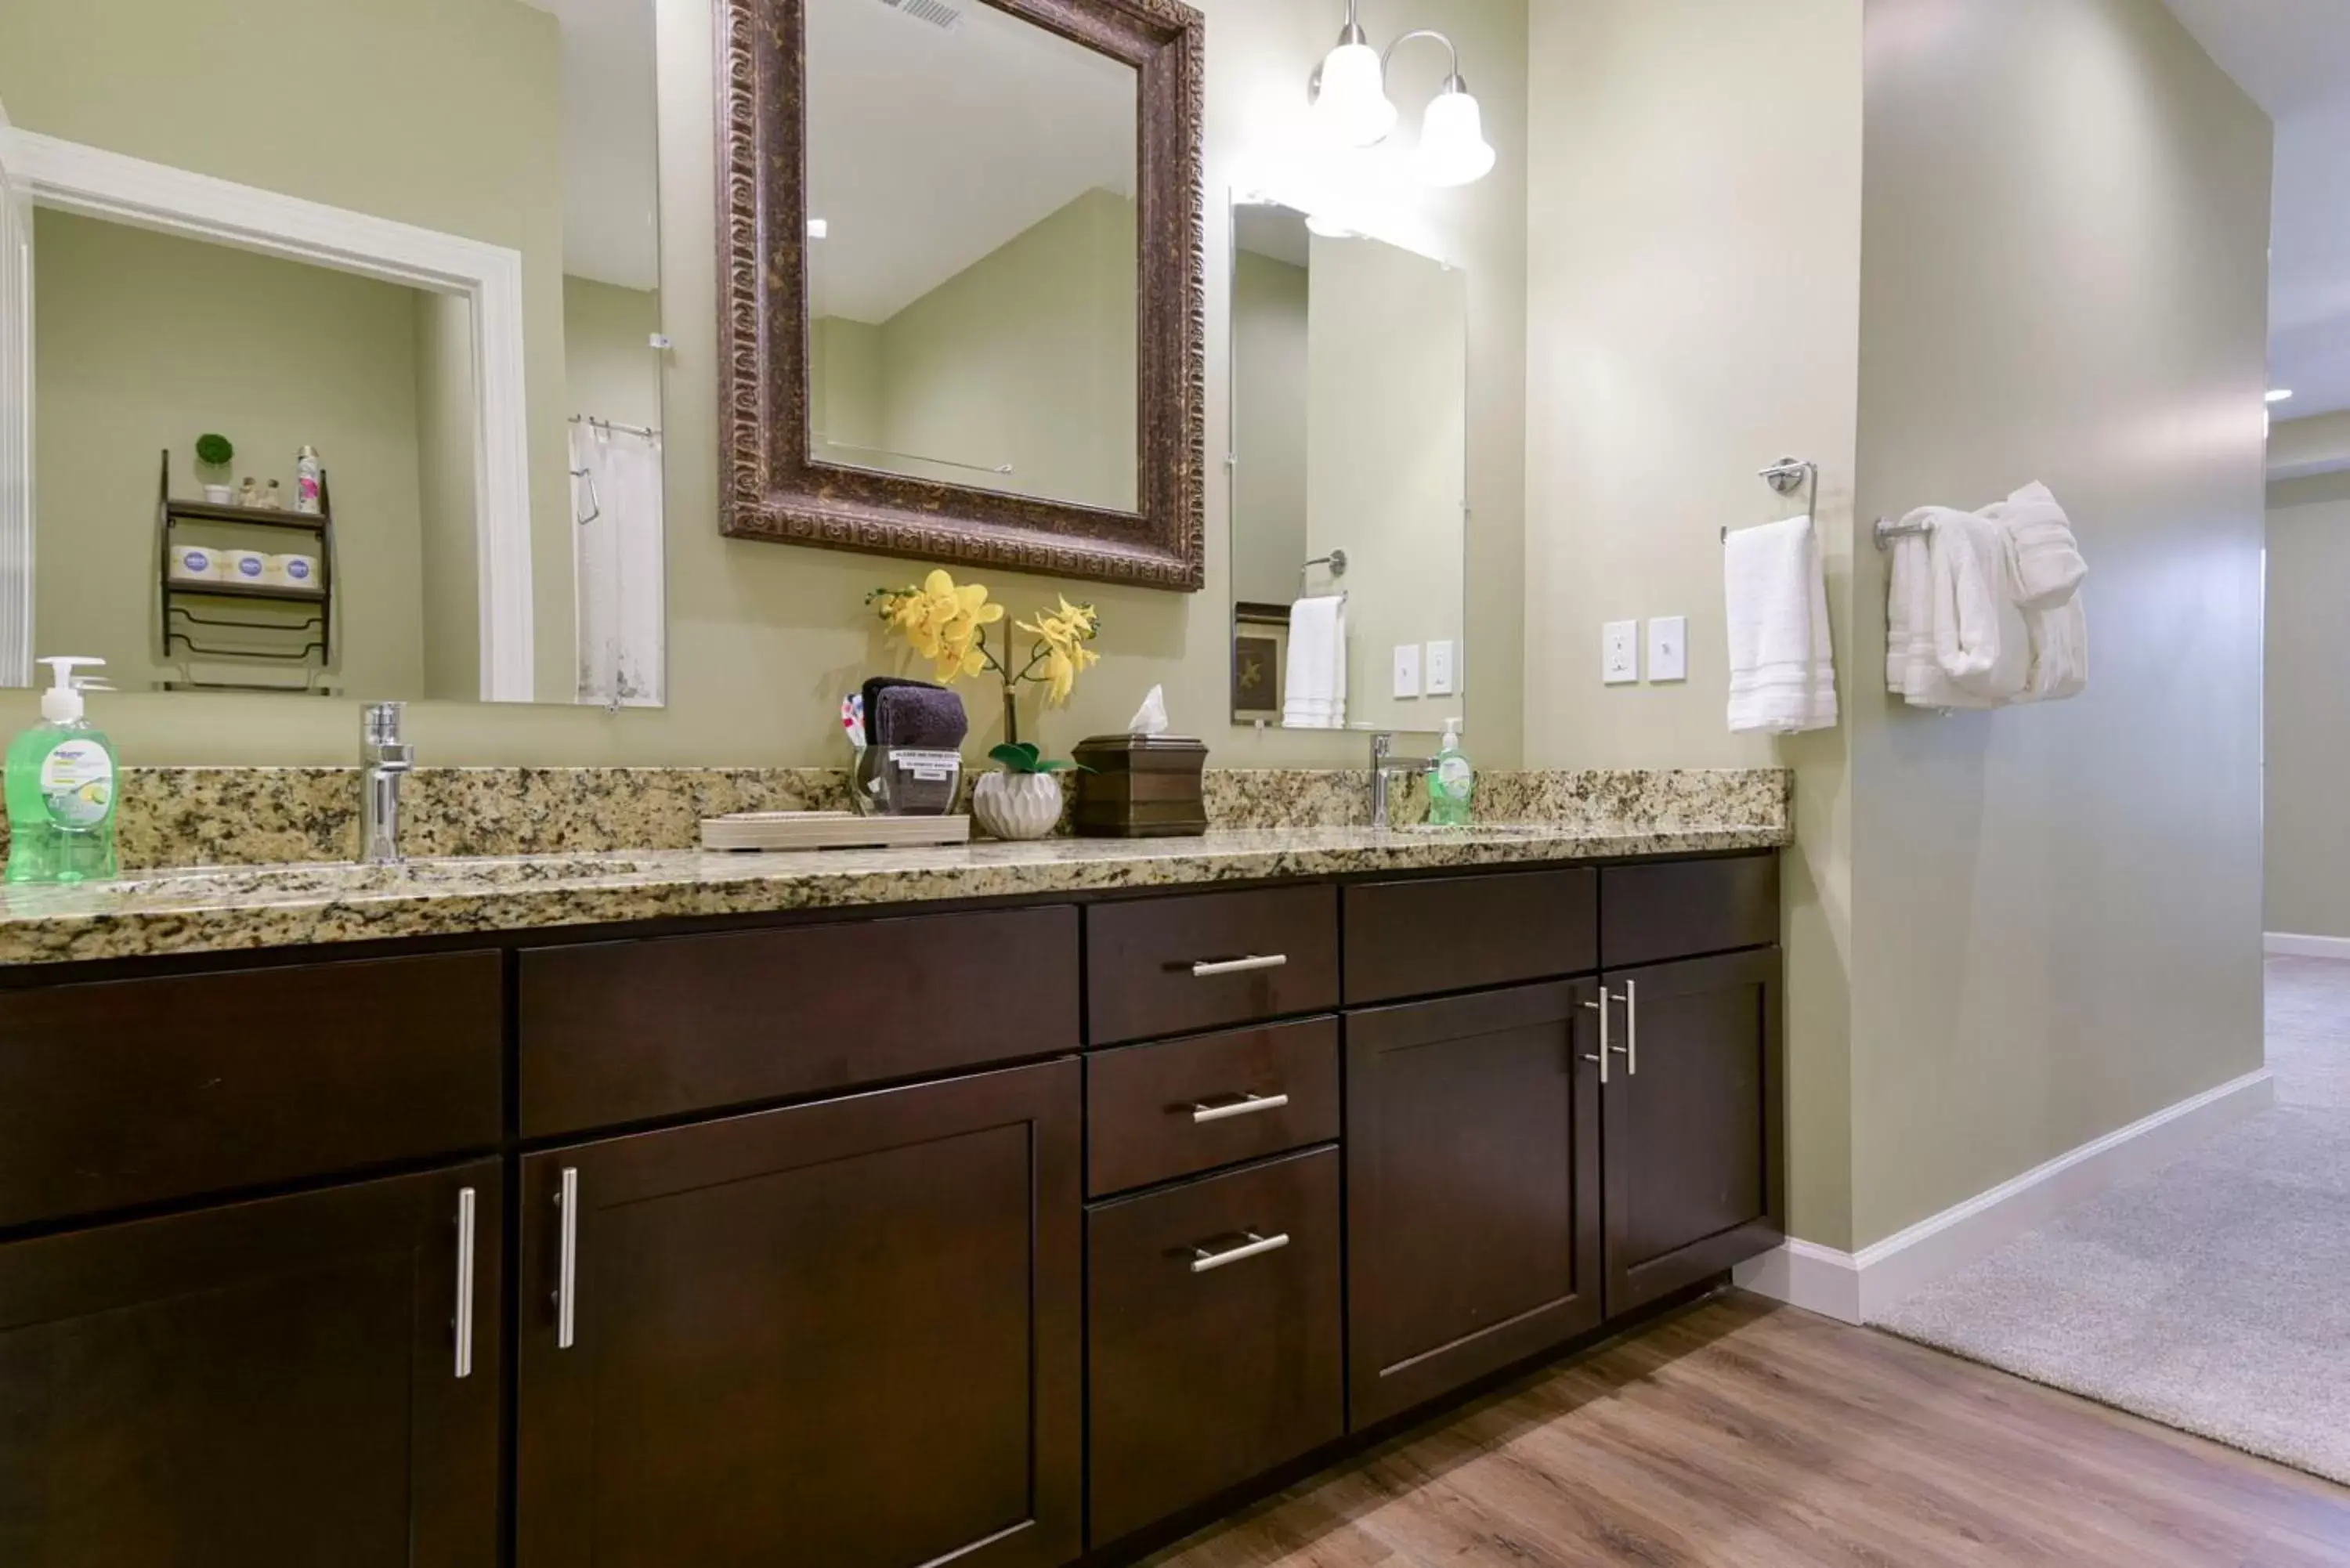 Bathroom in Luxury Condos at Thousand Hills - Branson -Beautifully Remodeled